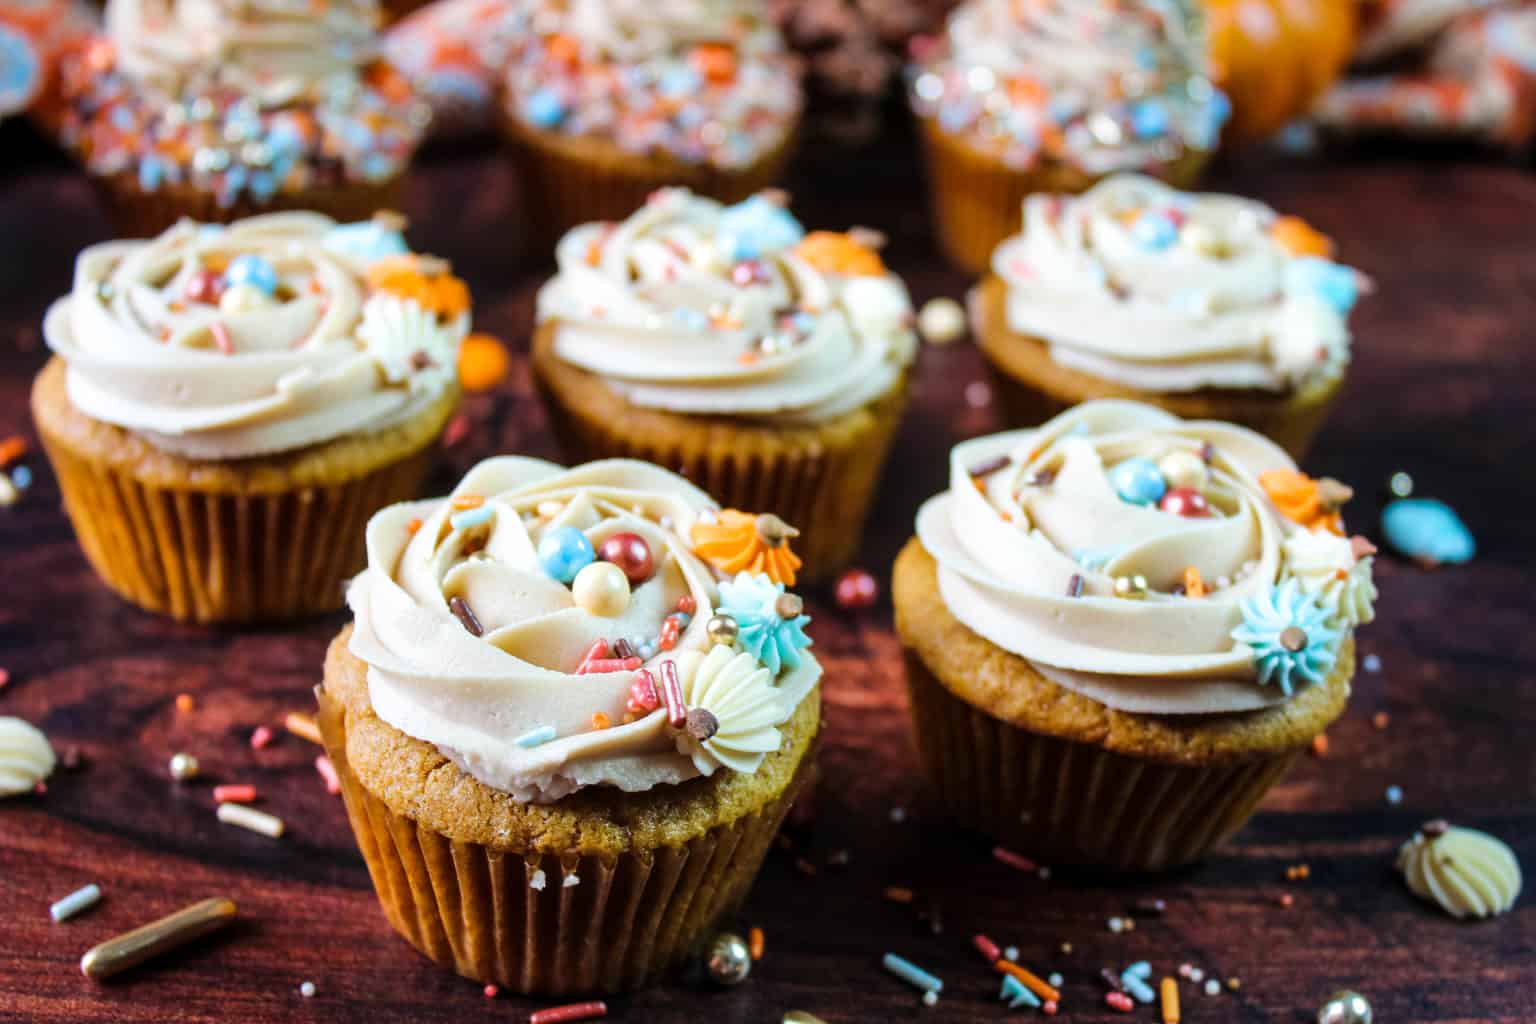 Pumpkin cupcakes with confetti sprinkles on top.